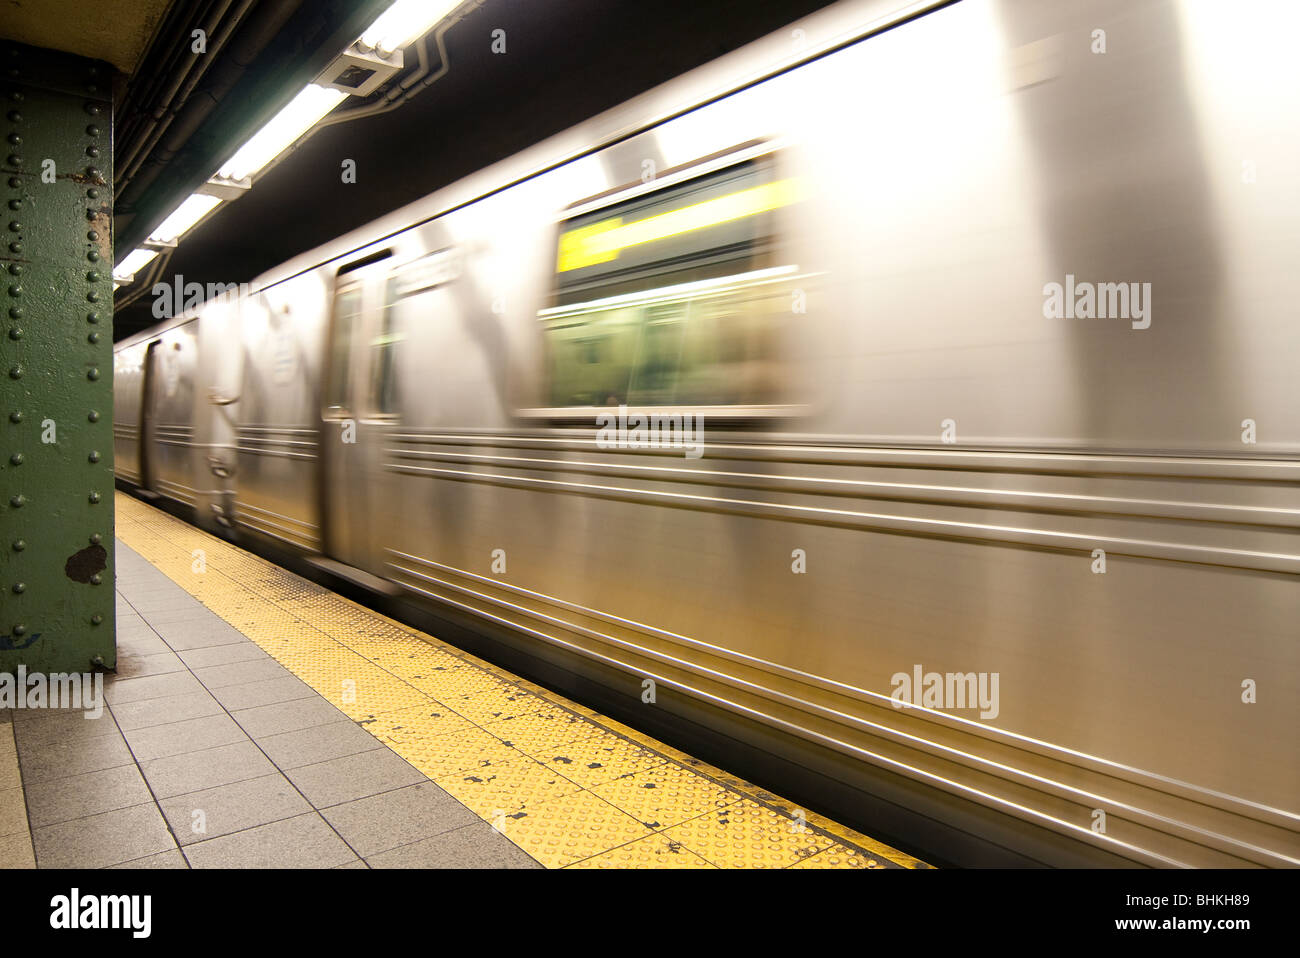 A silver MTA commuter subway train cart in motion blurred riding through a station in New York City next to an empty platform. Stock Photo